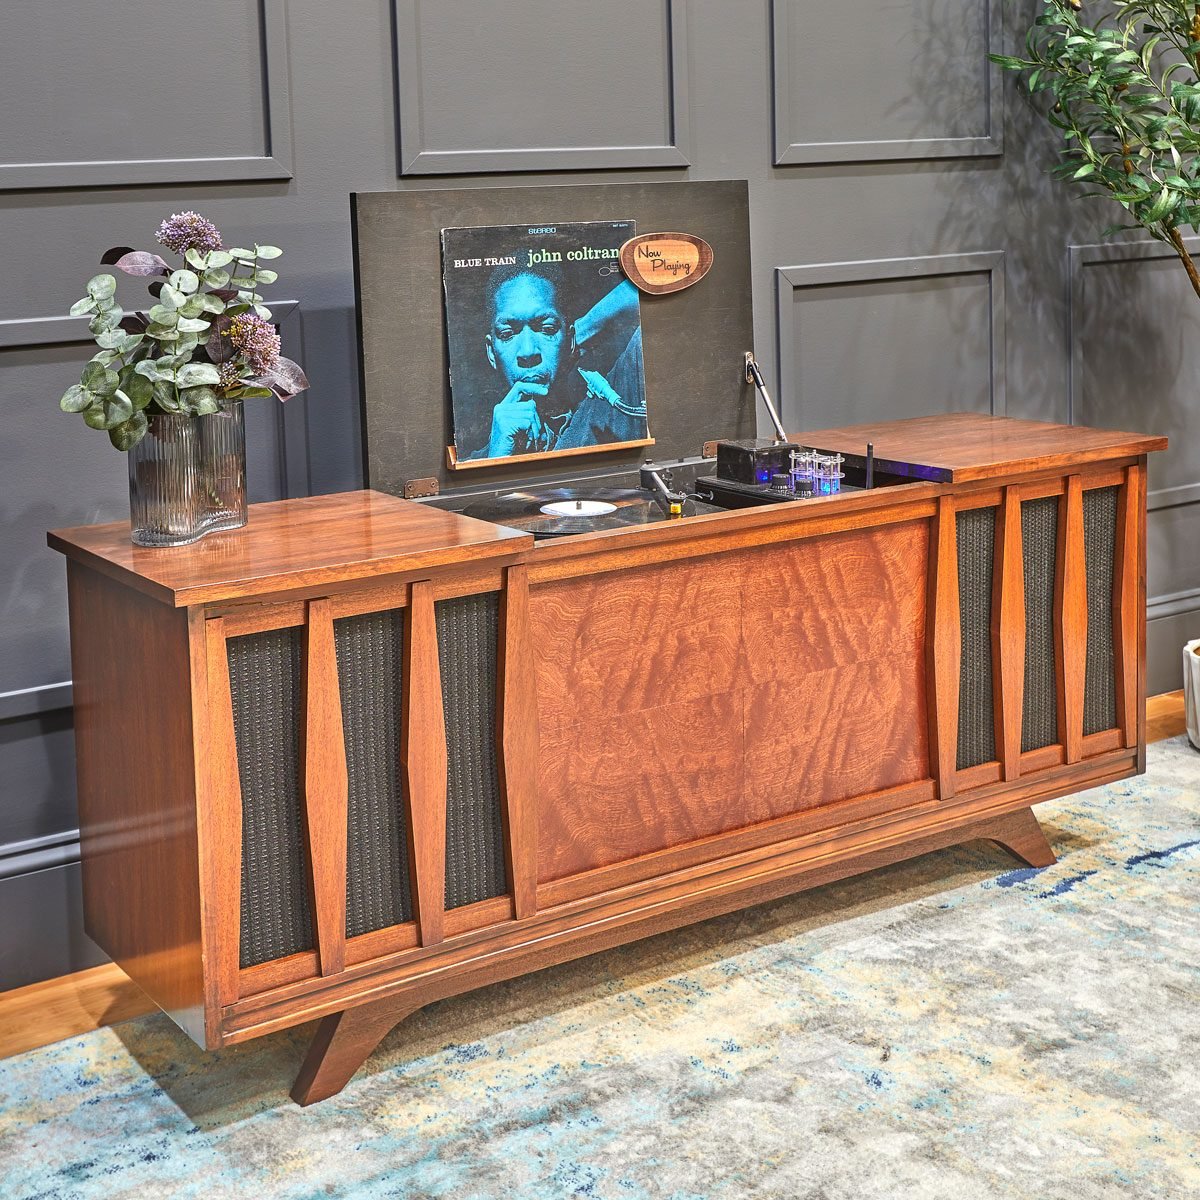 How to Restore a Vintage Console Stereo